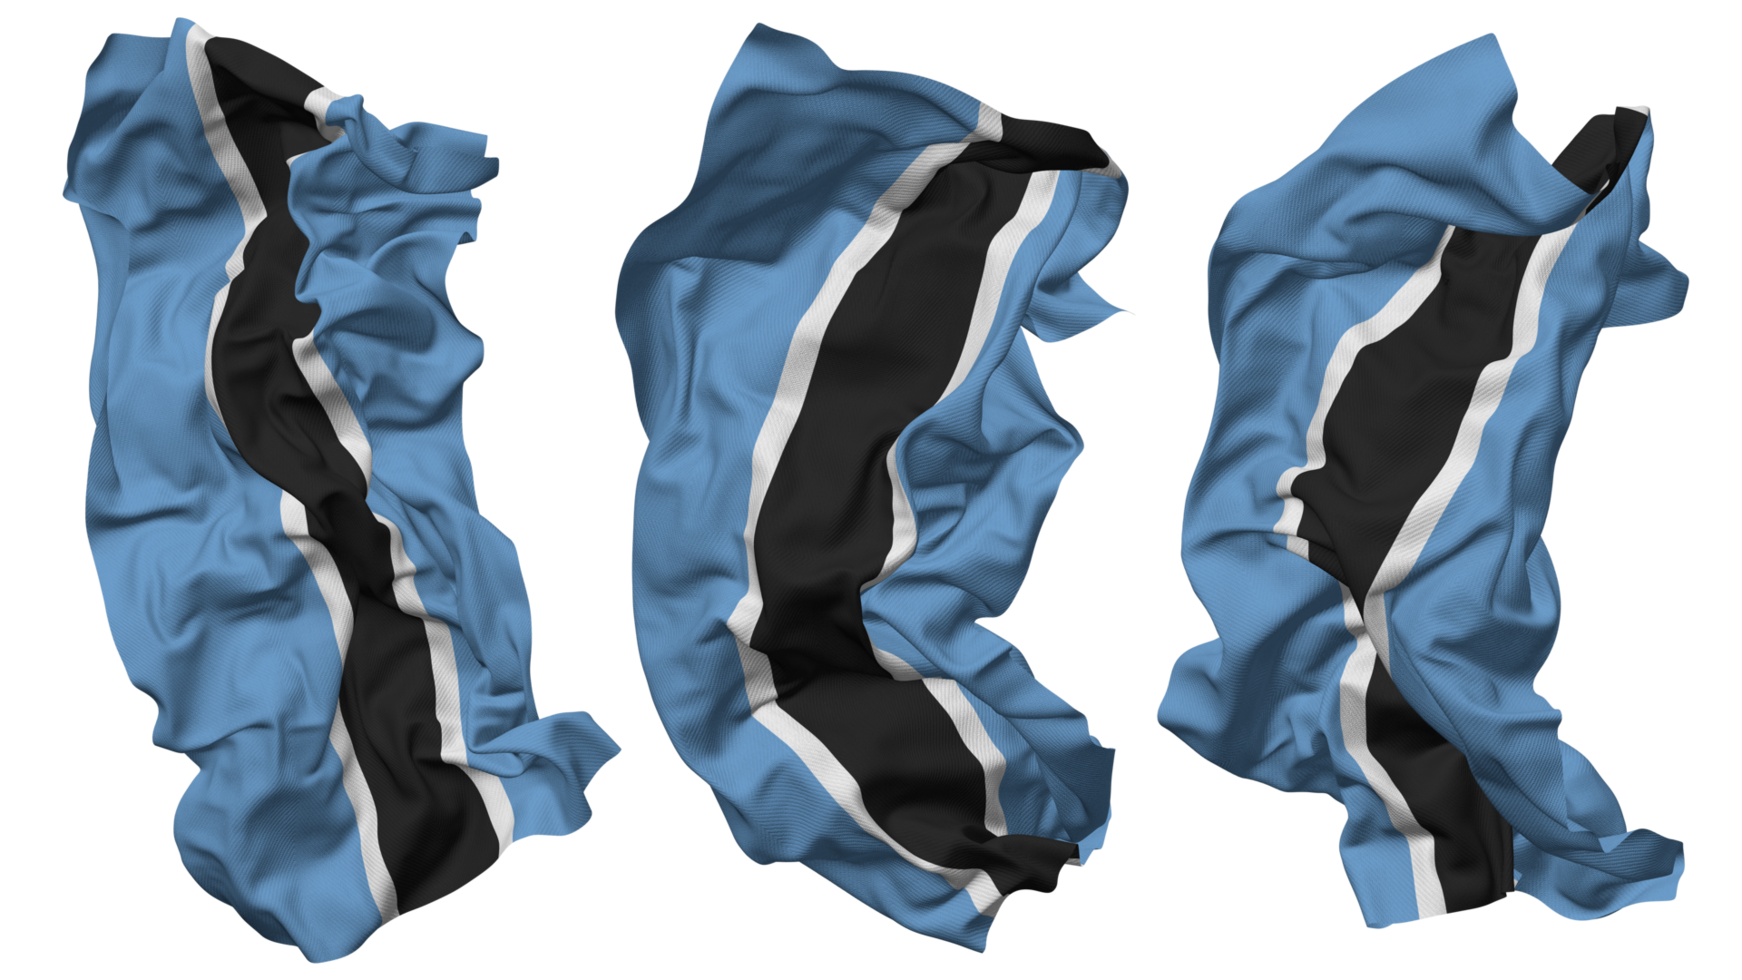 Botswana Flag Waves Isolated in Different Styles with Bump Texture, 3D Rendering png